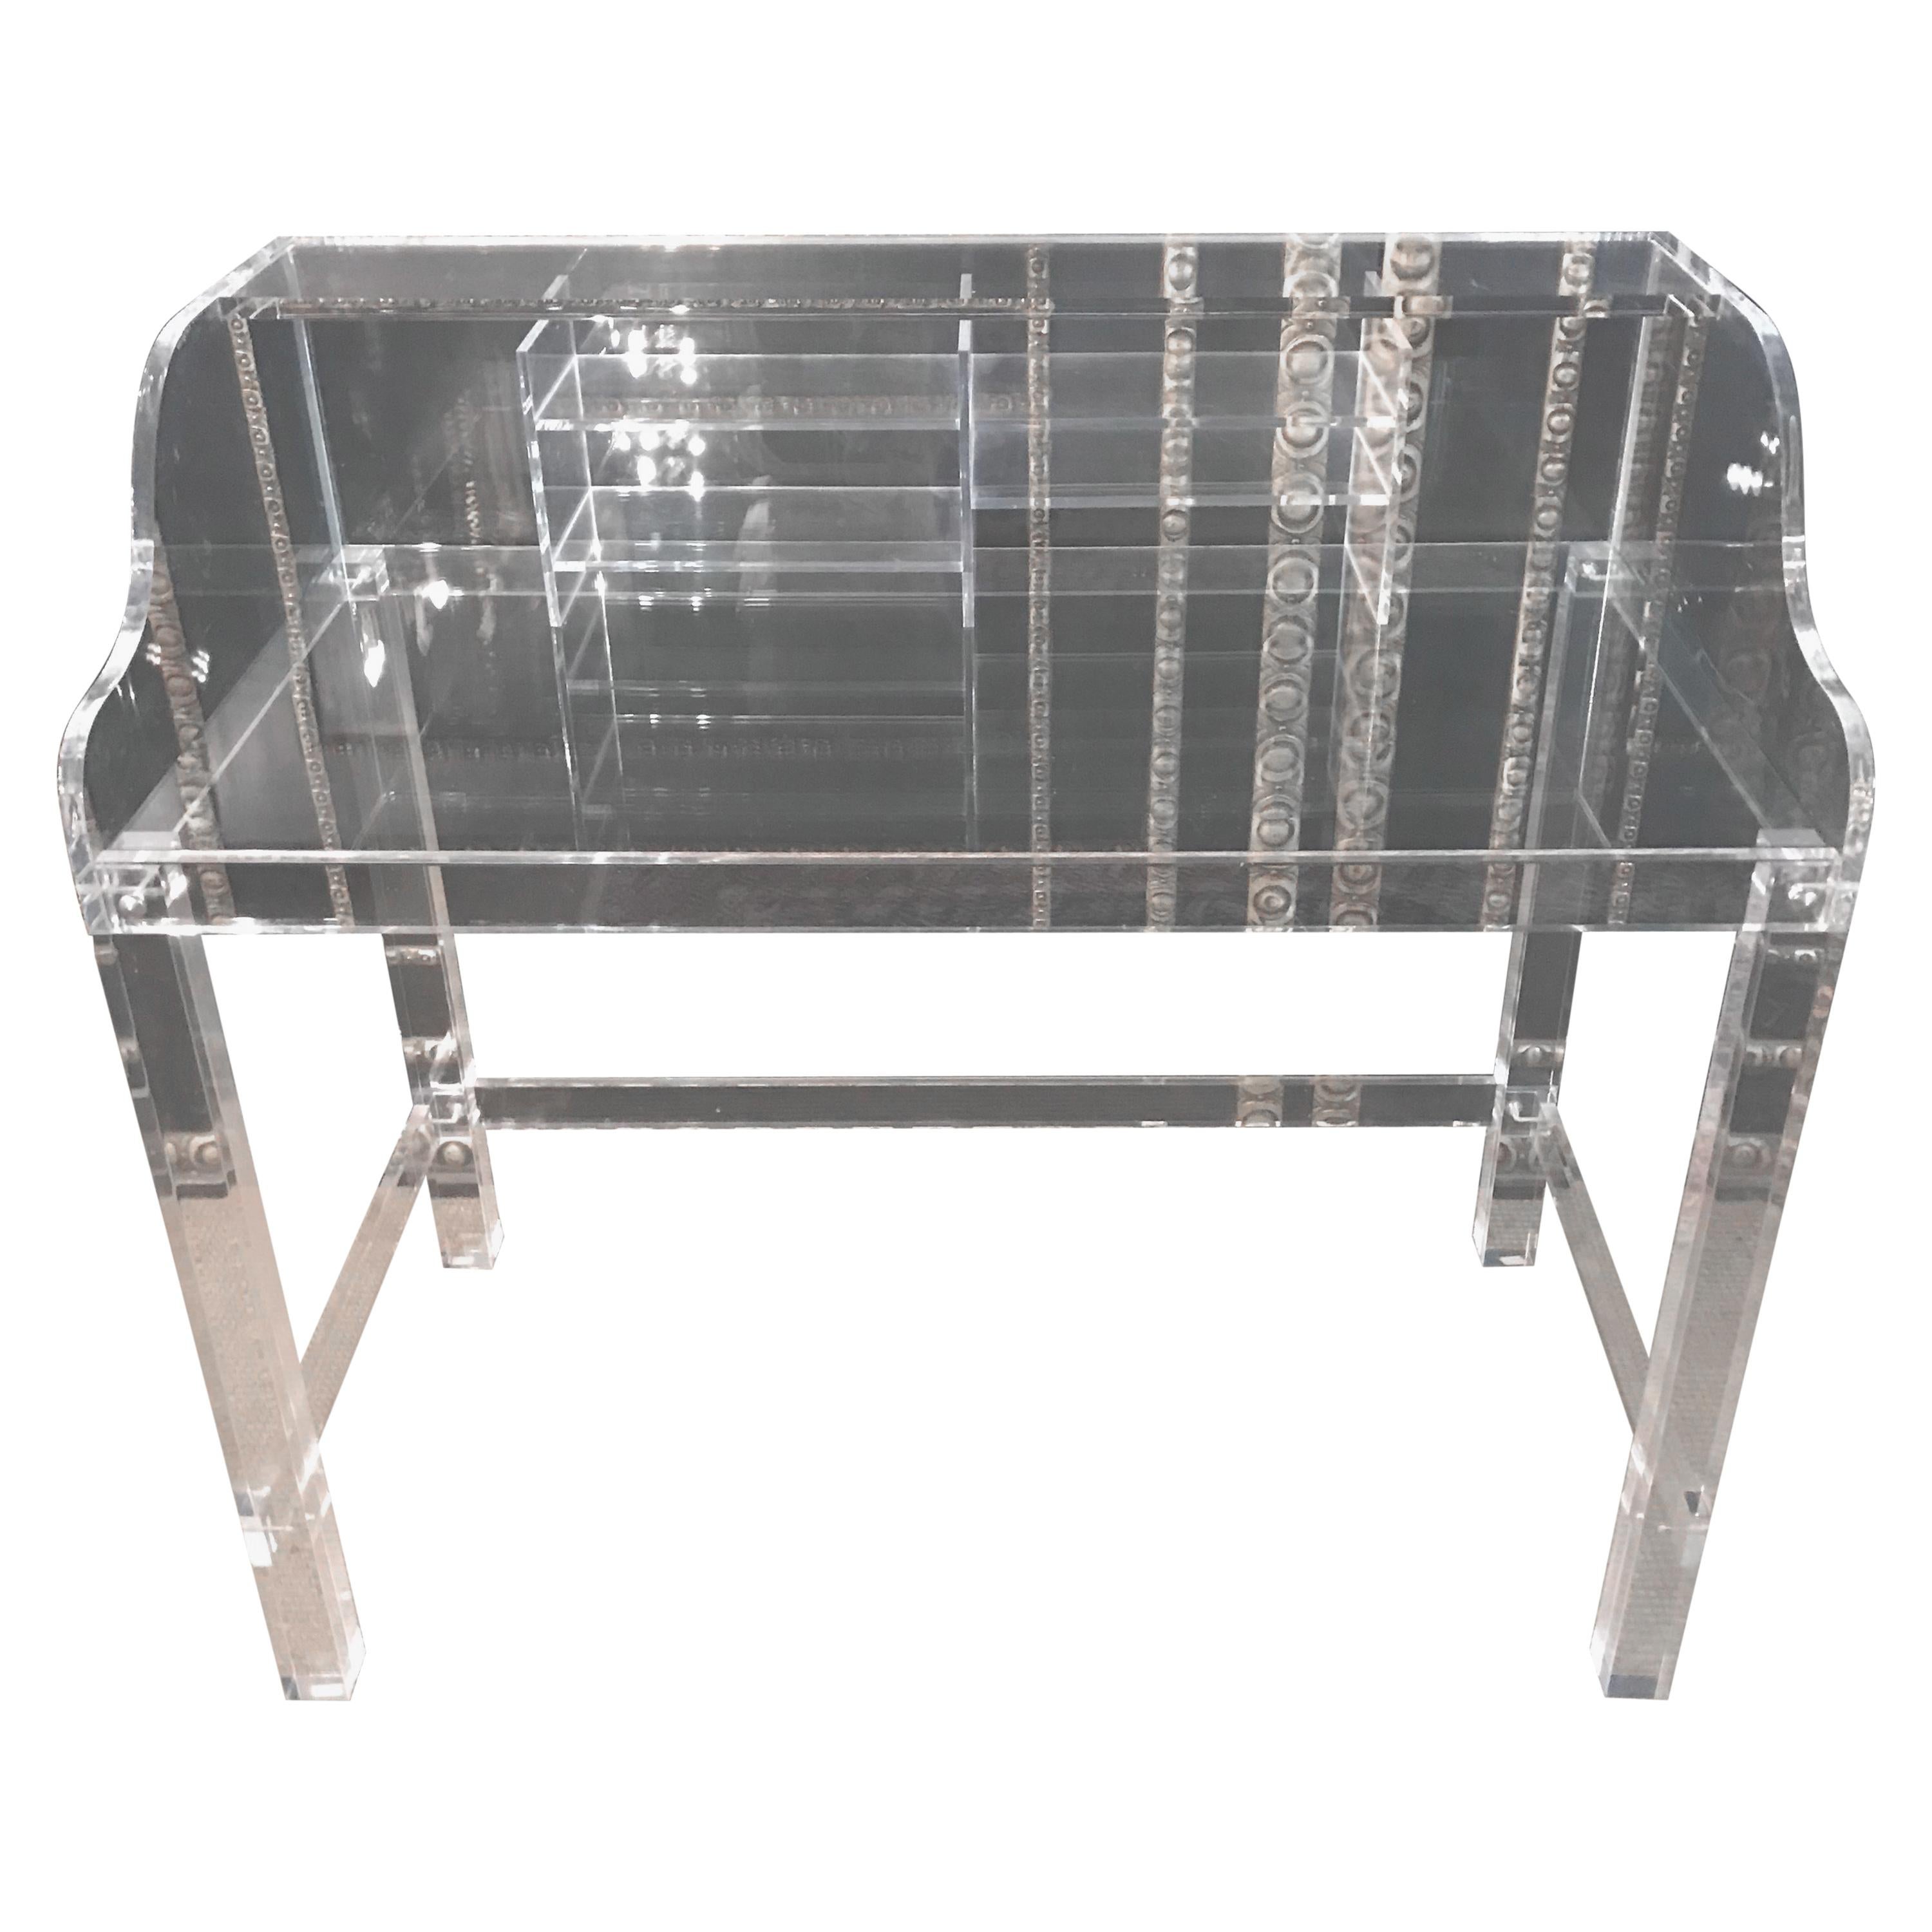 Modern Acrylic Desk with Top with 4 Legs